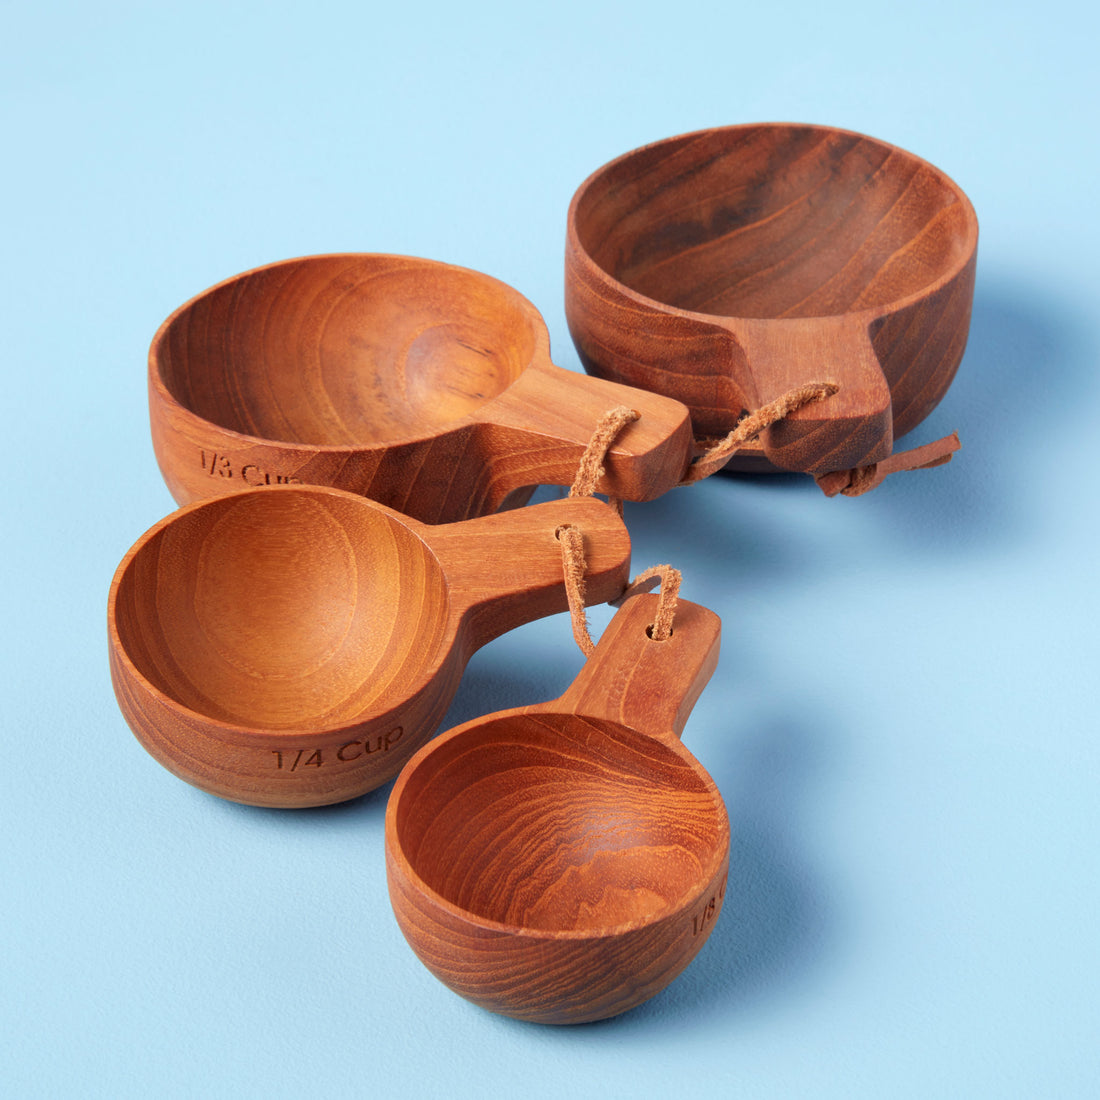 https://cdn.shopify.com/s/files/1/0376/0920/9900/products/Be-Home_Teak-Measuring-Cups-with-Handle_39-662.jpg?v=1605656232&width=1100